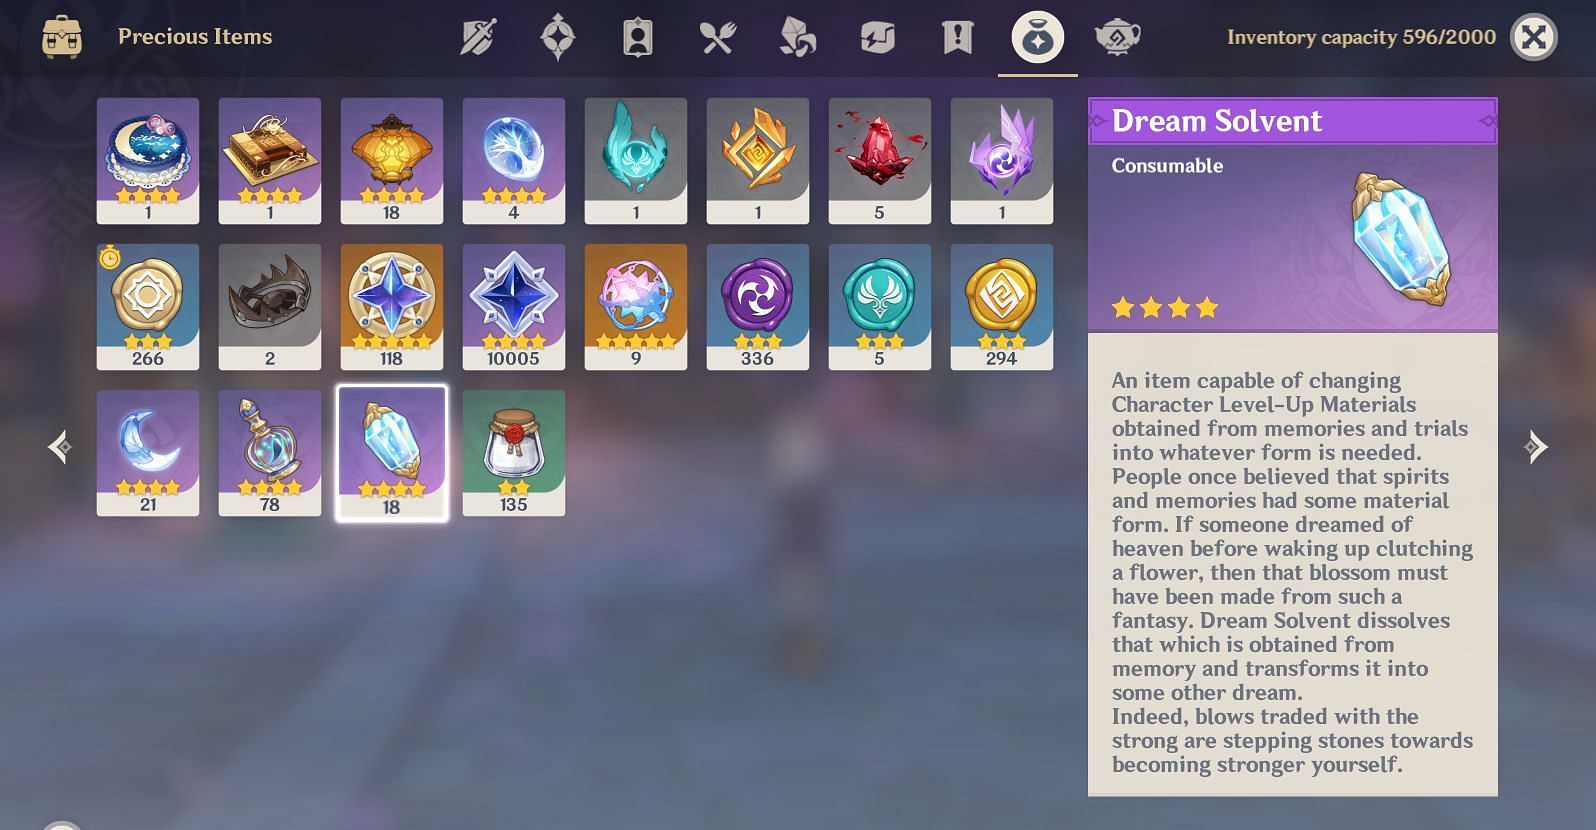 Dream Solvent in the inventory (Image via HoYoverse)